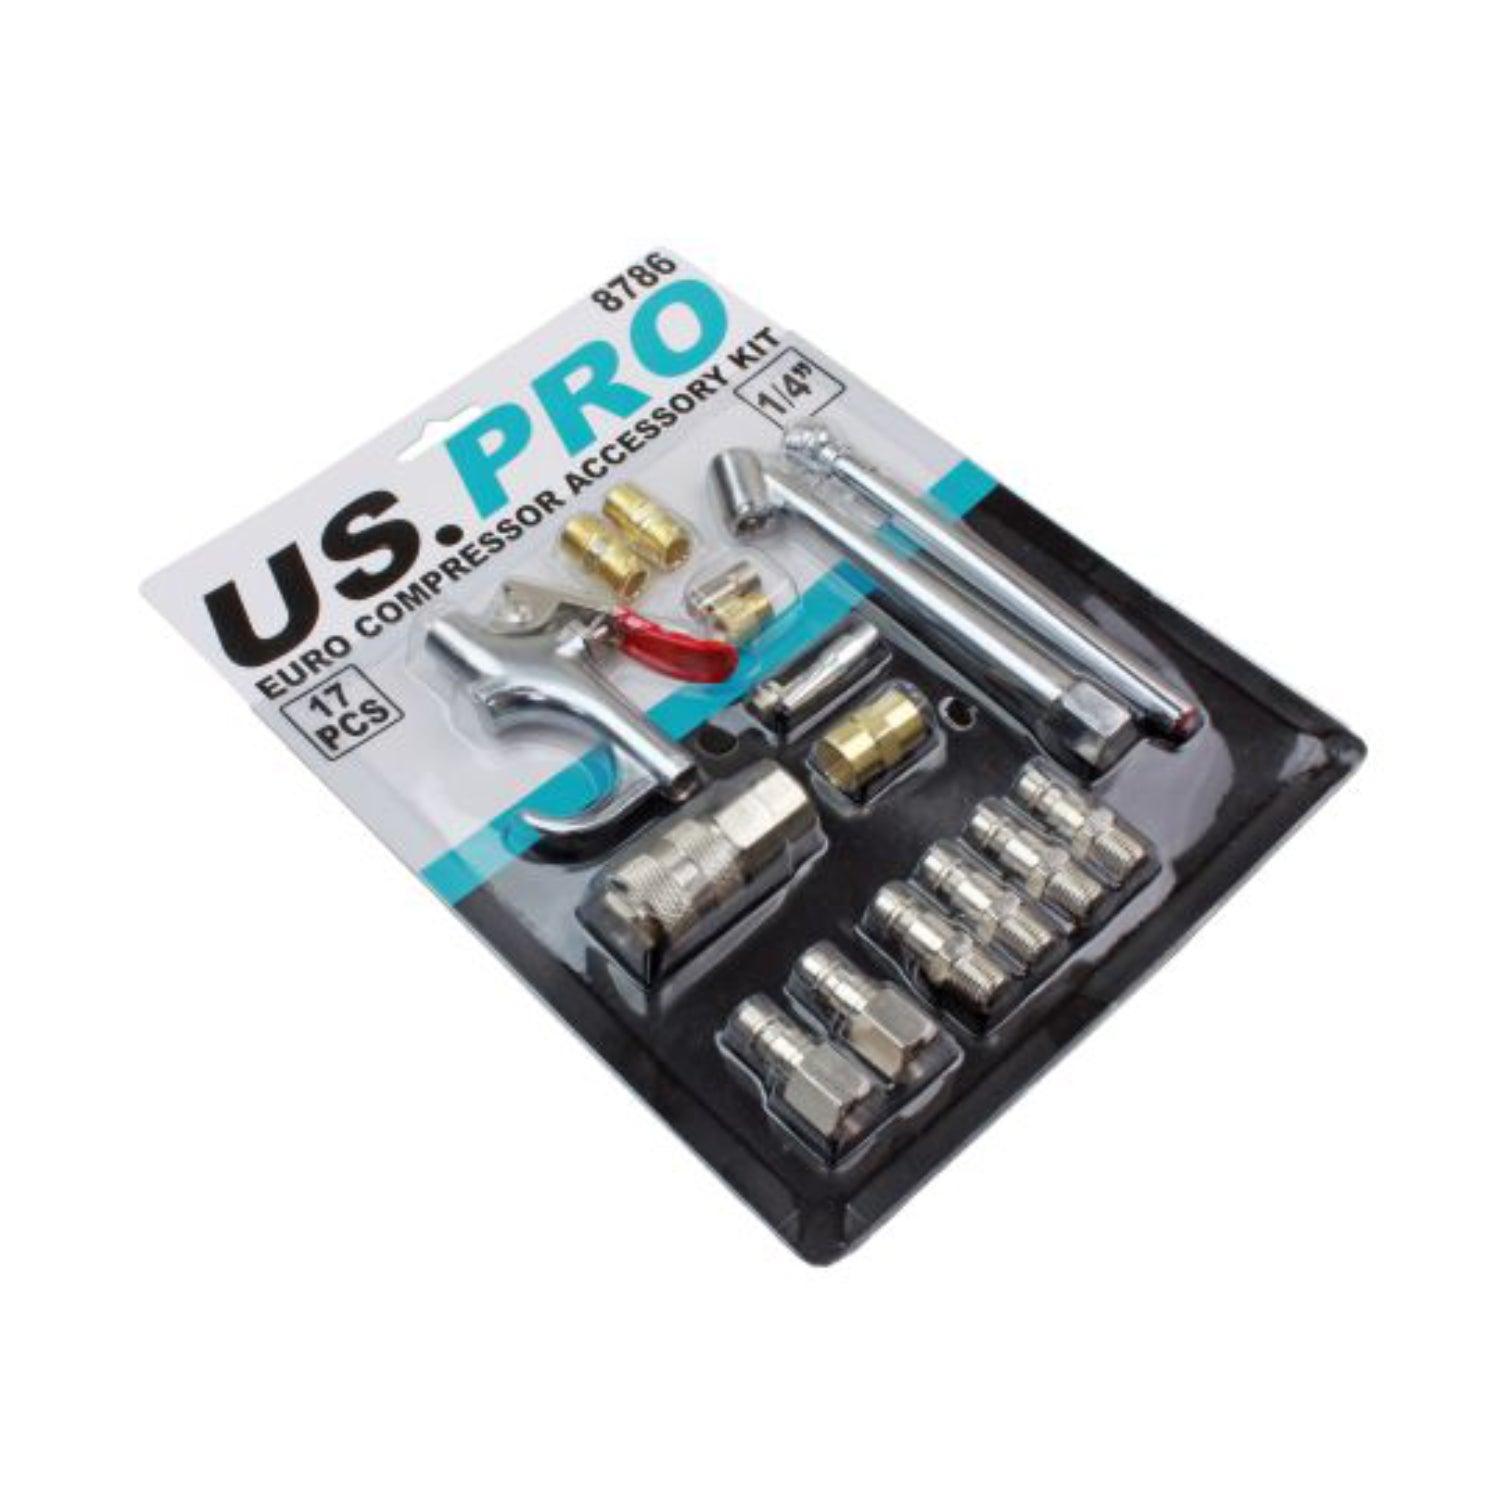 US PRO Tools Compressor Accessory Kit Fittings 17pc Euro 1/4 Inch Air Line Connectors 8786 - Tools 2U Direct SW